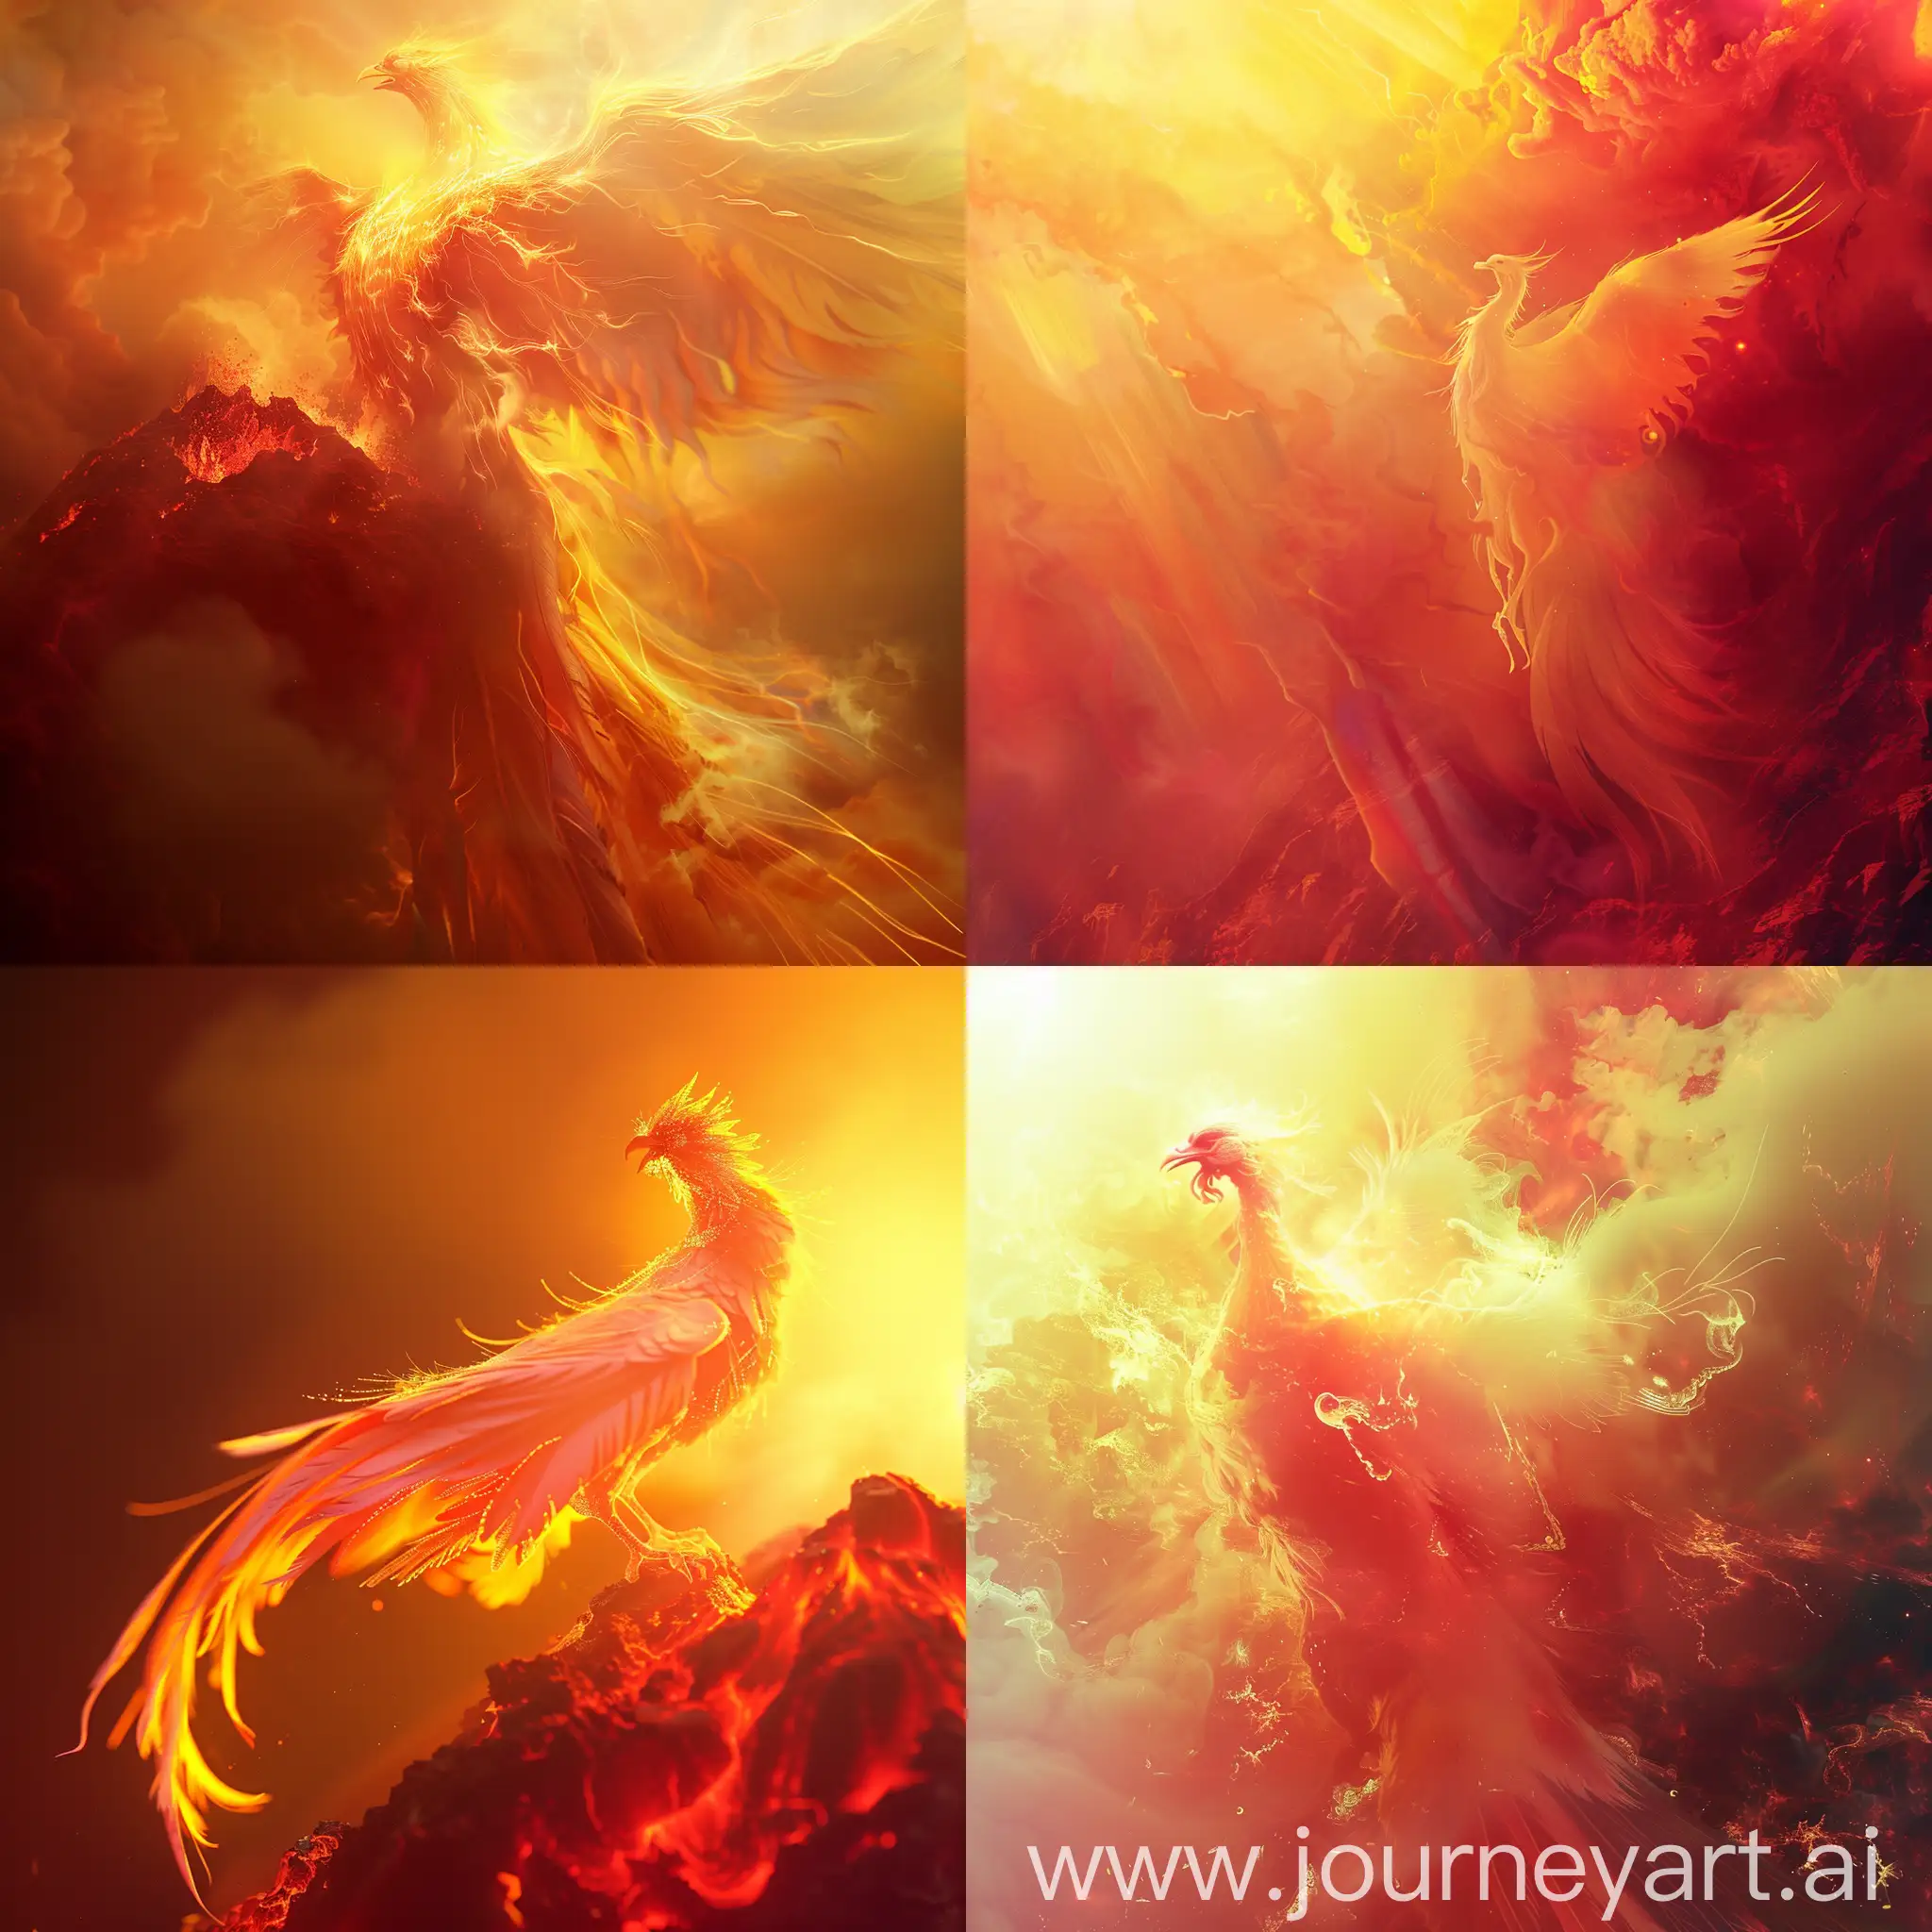 Phoenix mythology China character in a volcano, with subtle red and yellow gradients, fire effect, backlight, pastel colours, sci-fi, realistic, fantasy art.